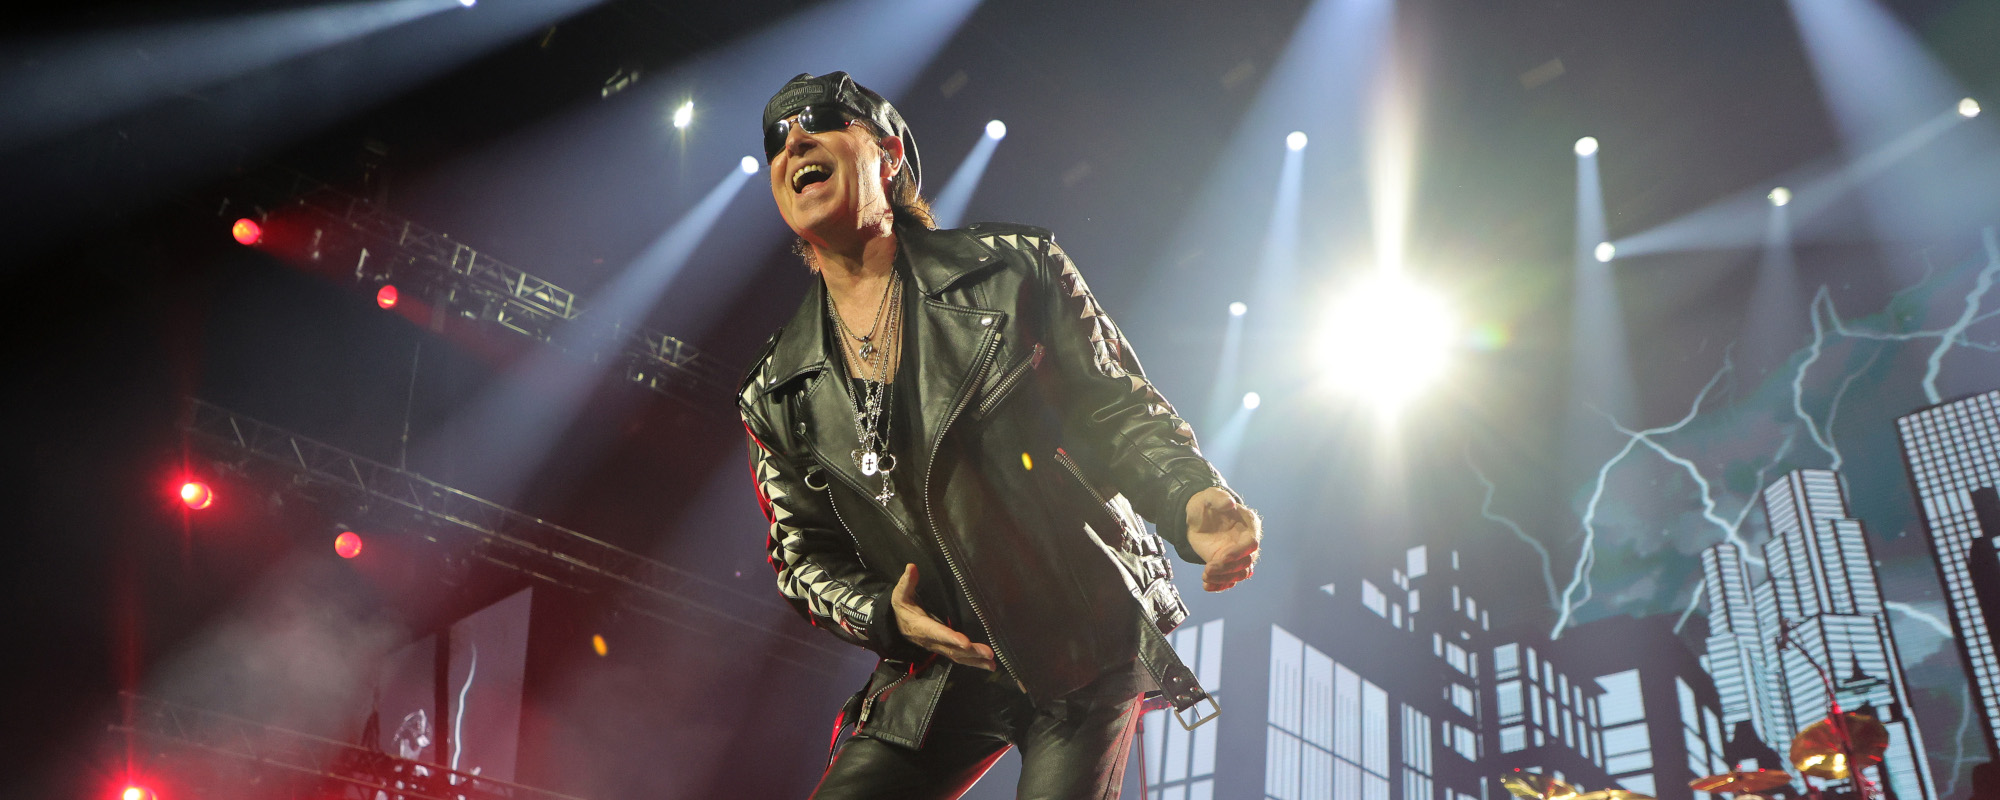 Scorpions Kick Off Love At First Sting Las Vegas Residency: How To Get Tickets